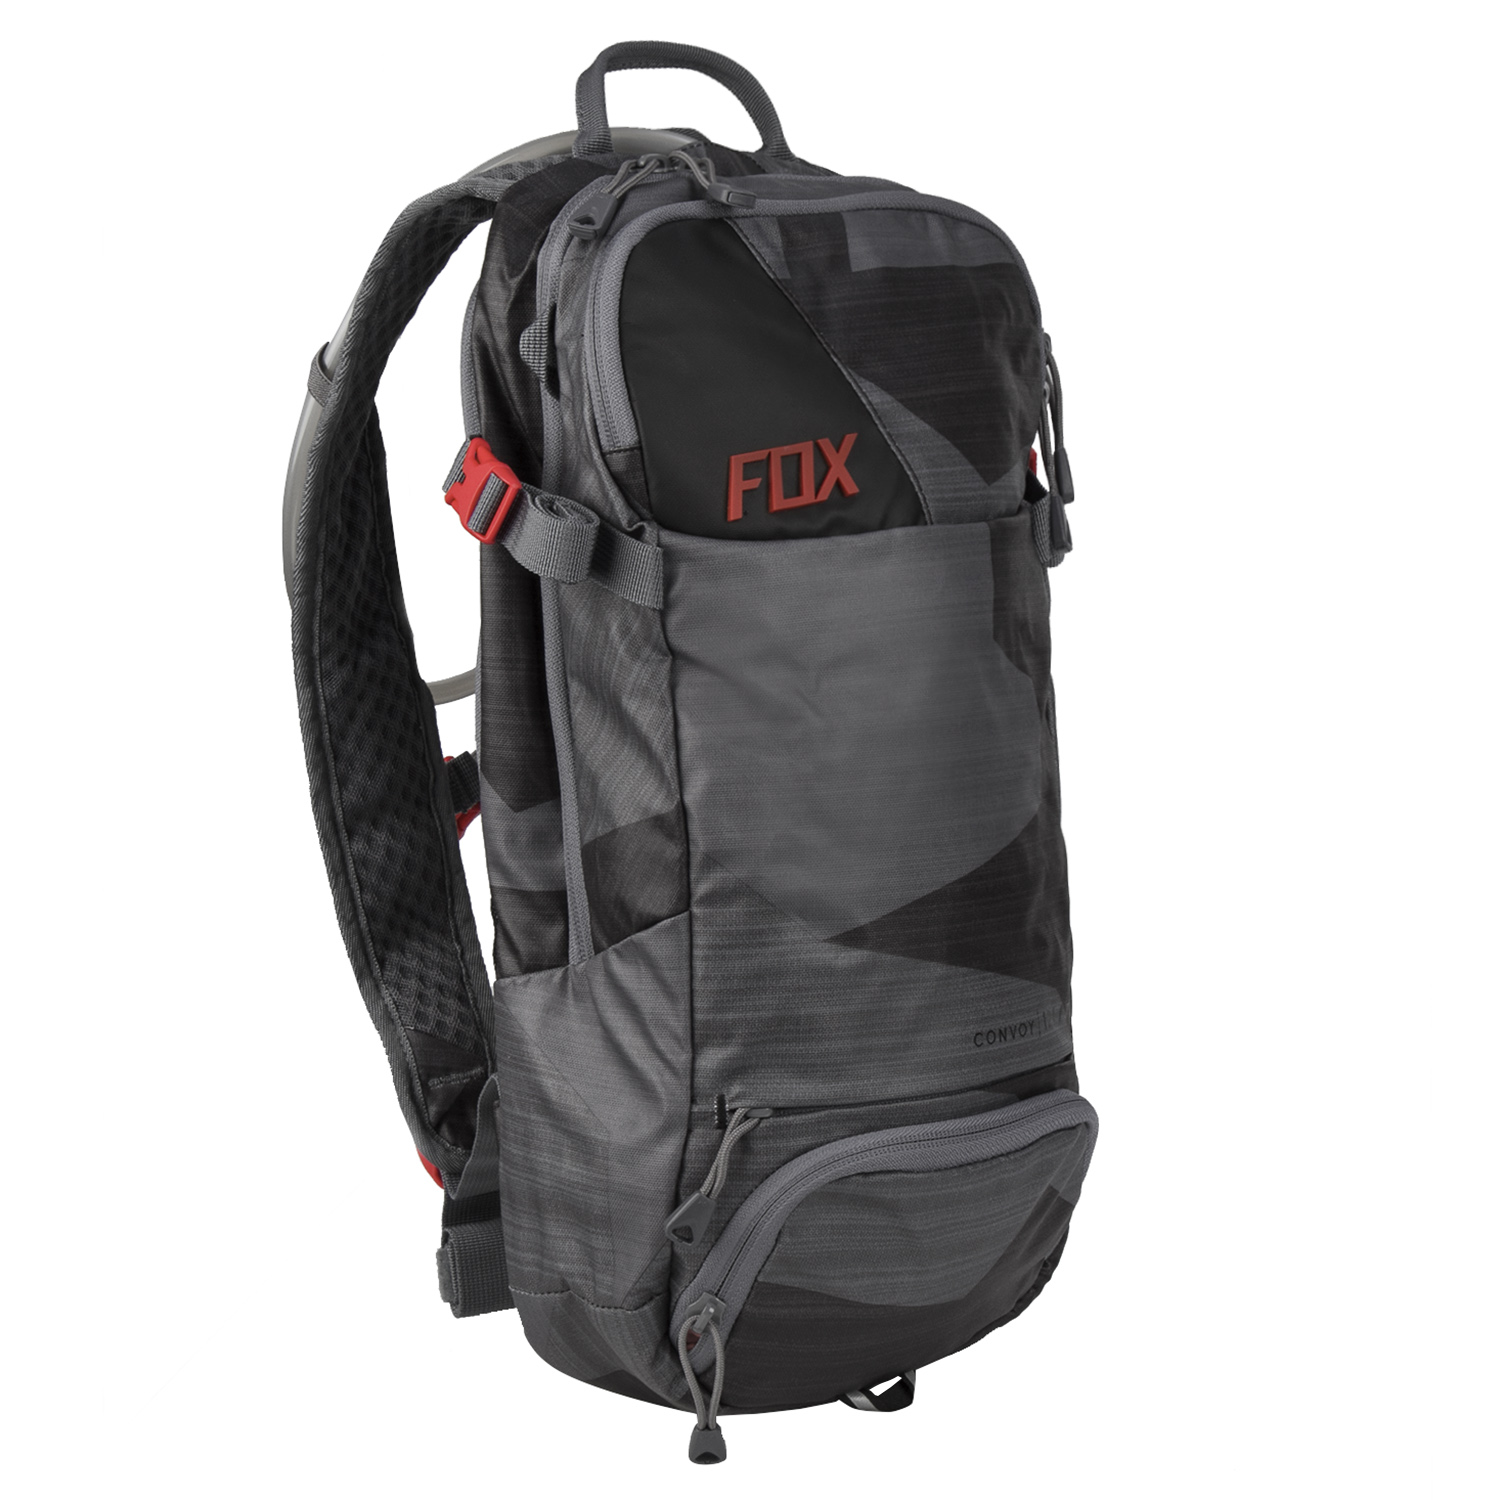 Fox Backpack with Hydration System Compartment Convoy Camo